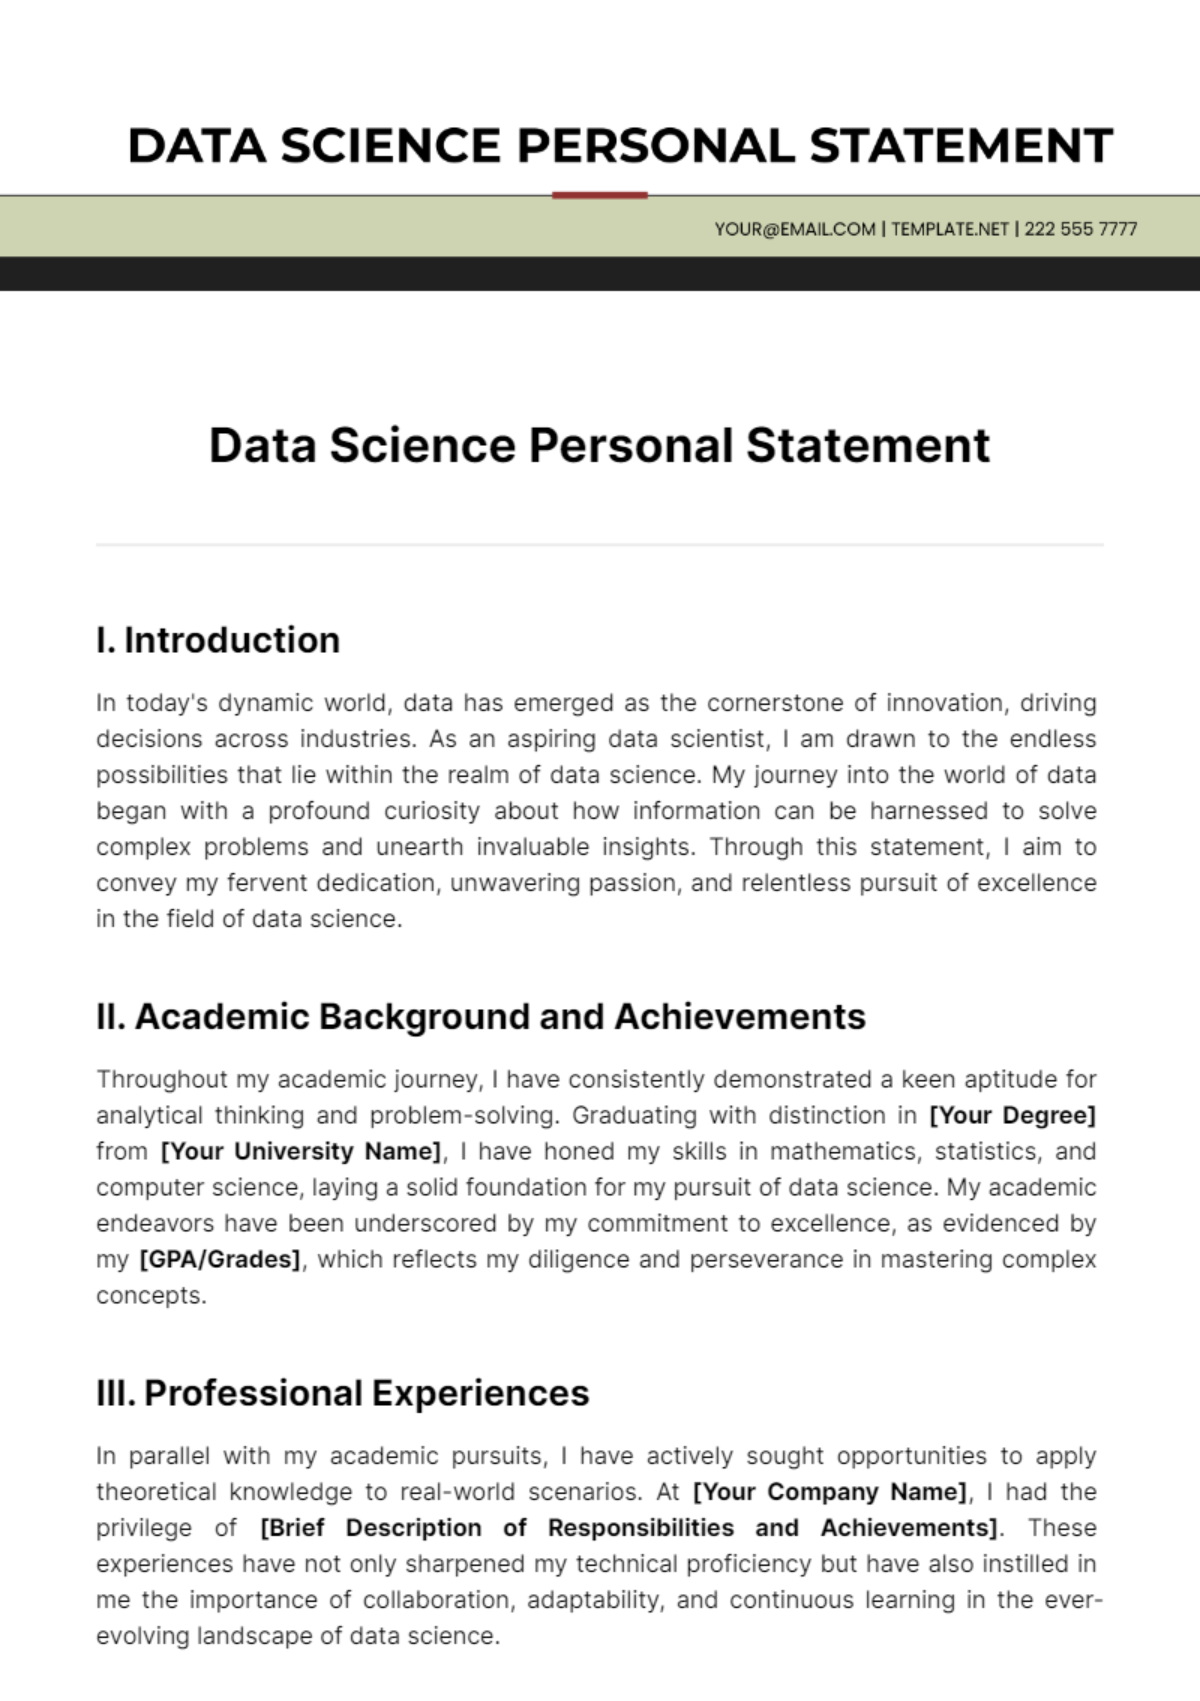 Data Science Personal Statement Template